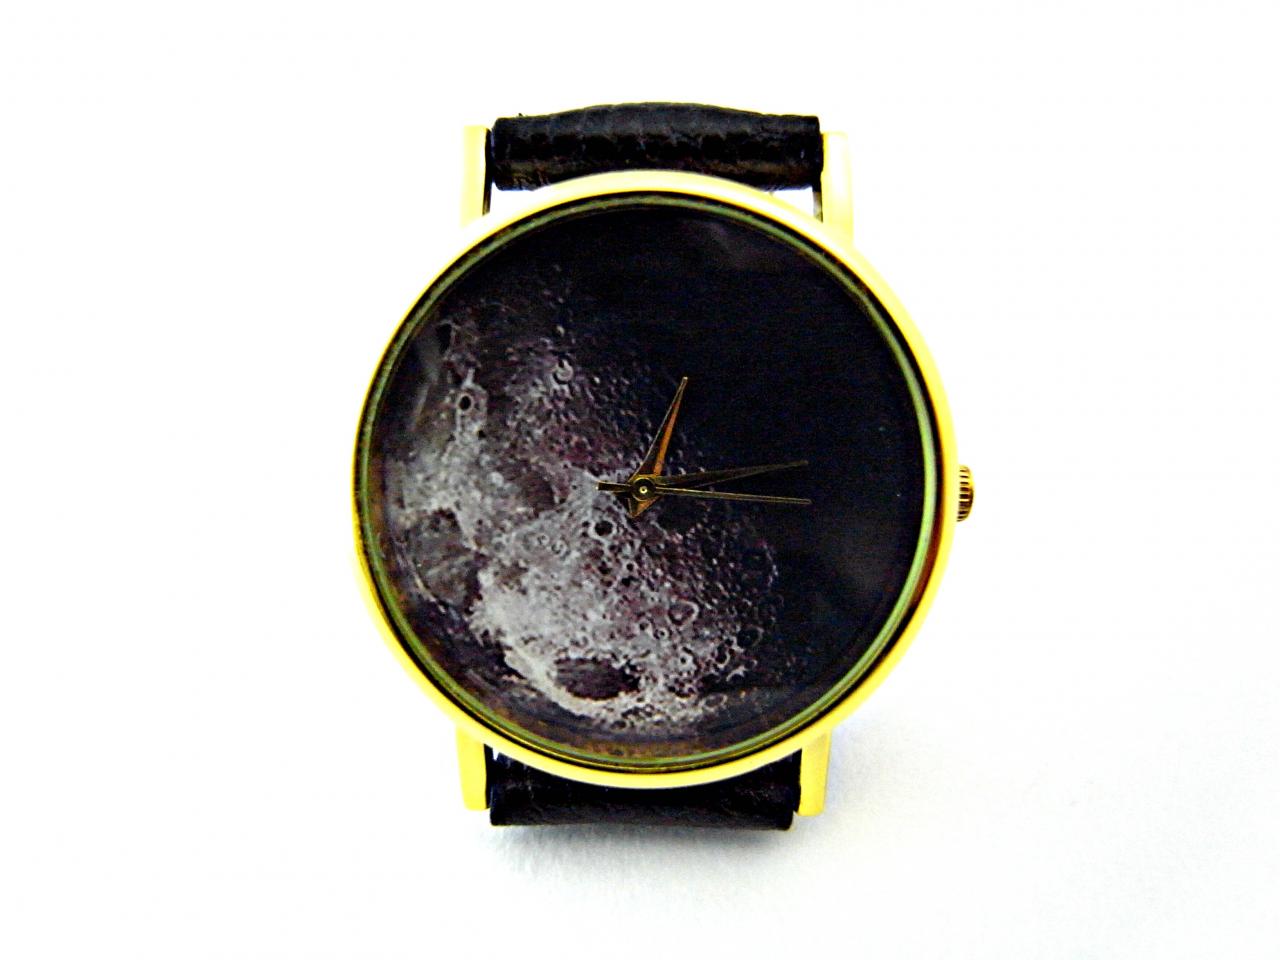 Moon Leather Wrist Watches, Woman Man Lady Unisex Watch, Genuine Leather Handmade Unique Watch #13